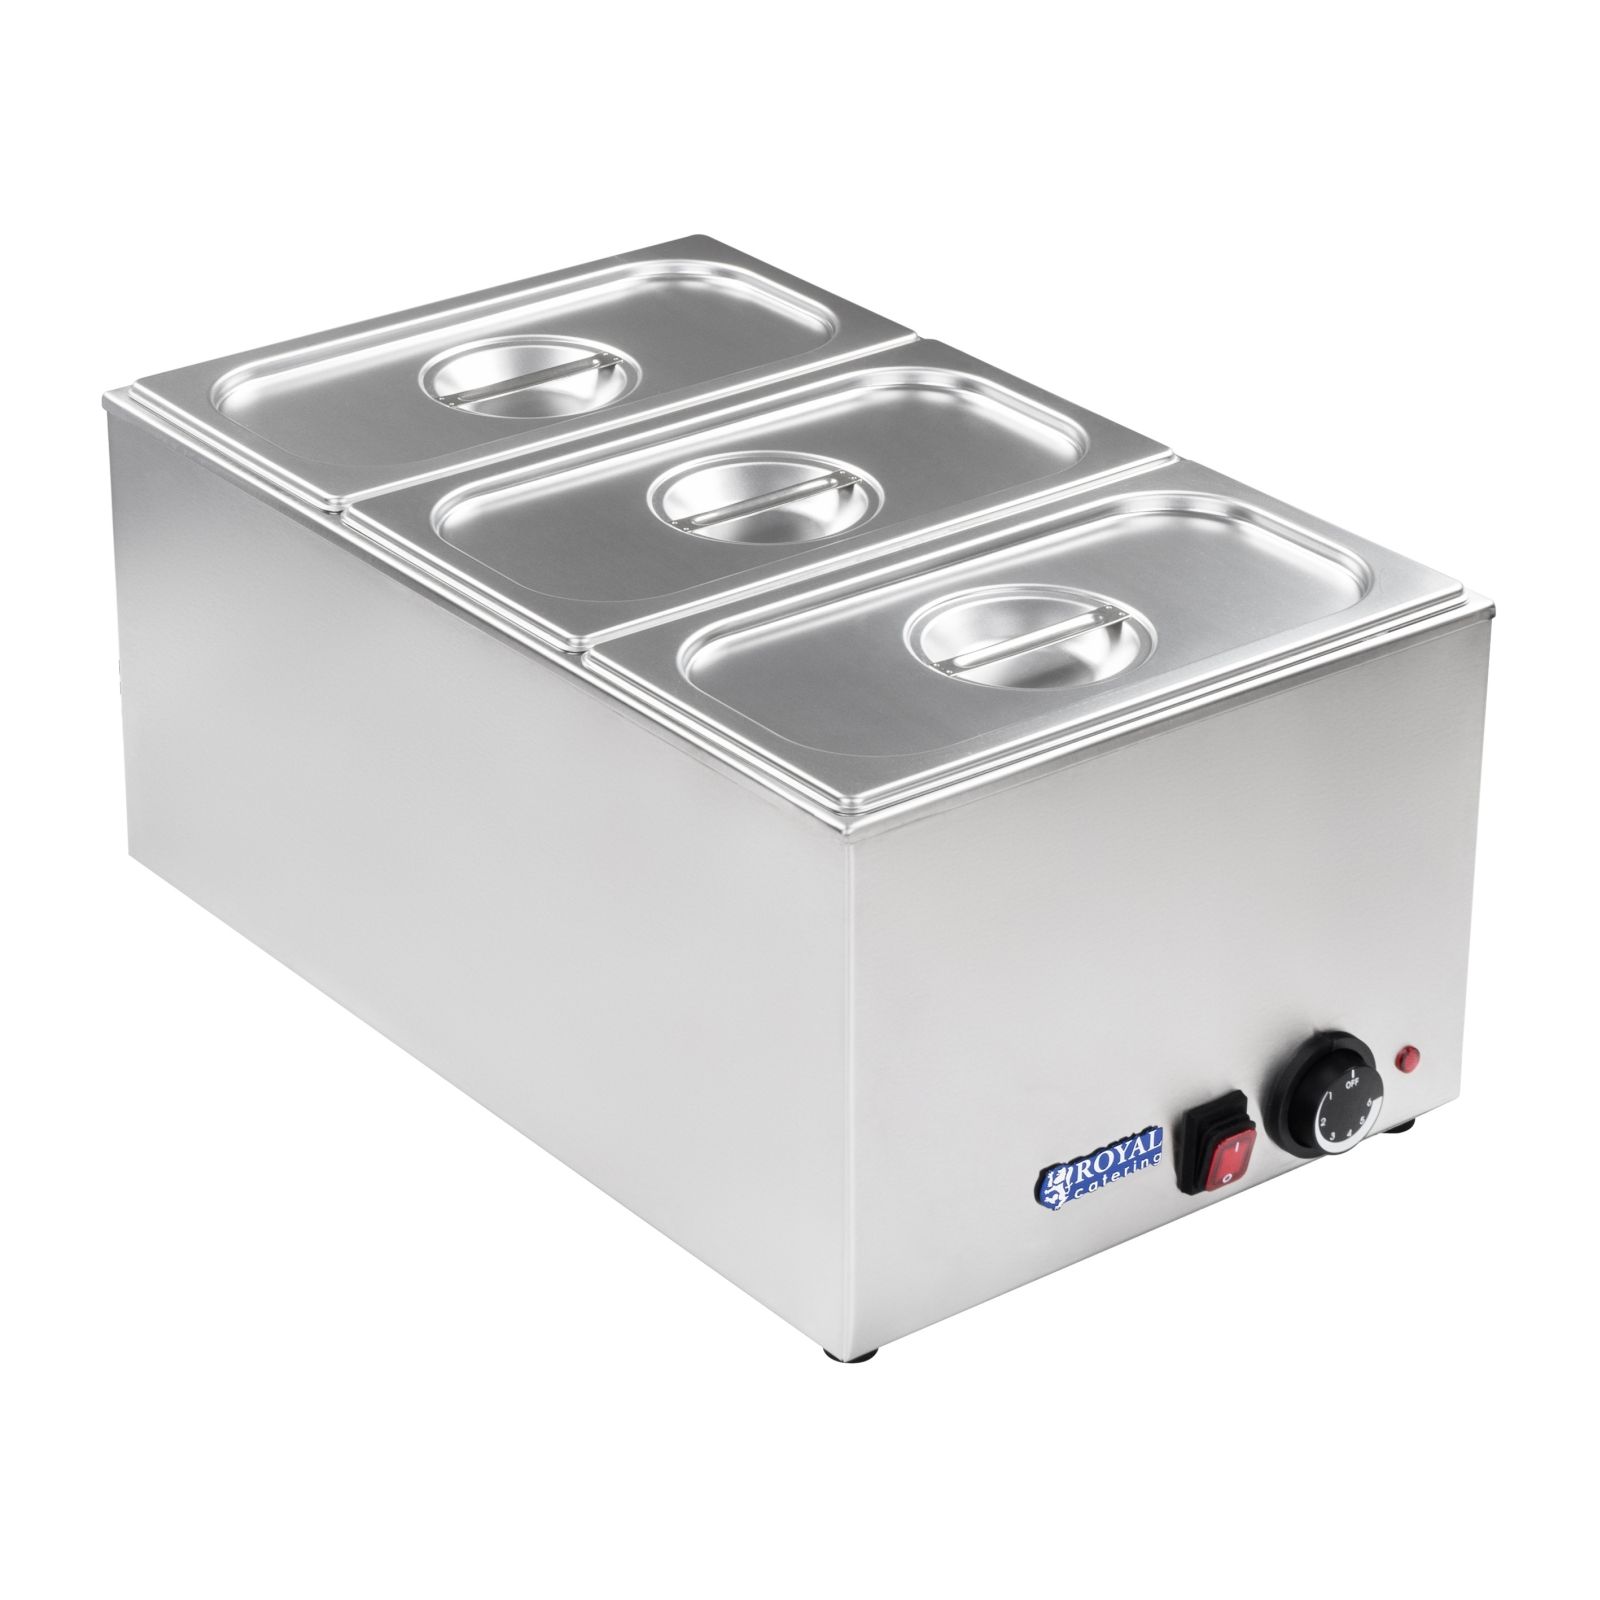 Royal Catering Bain Marie - GN Behälter - 1/3 10010195